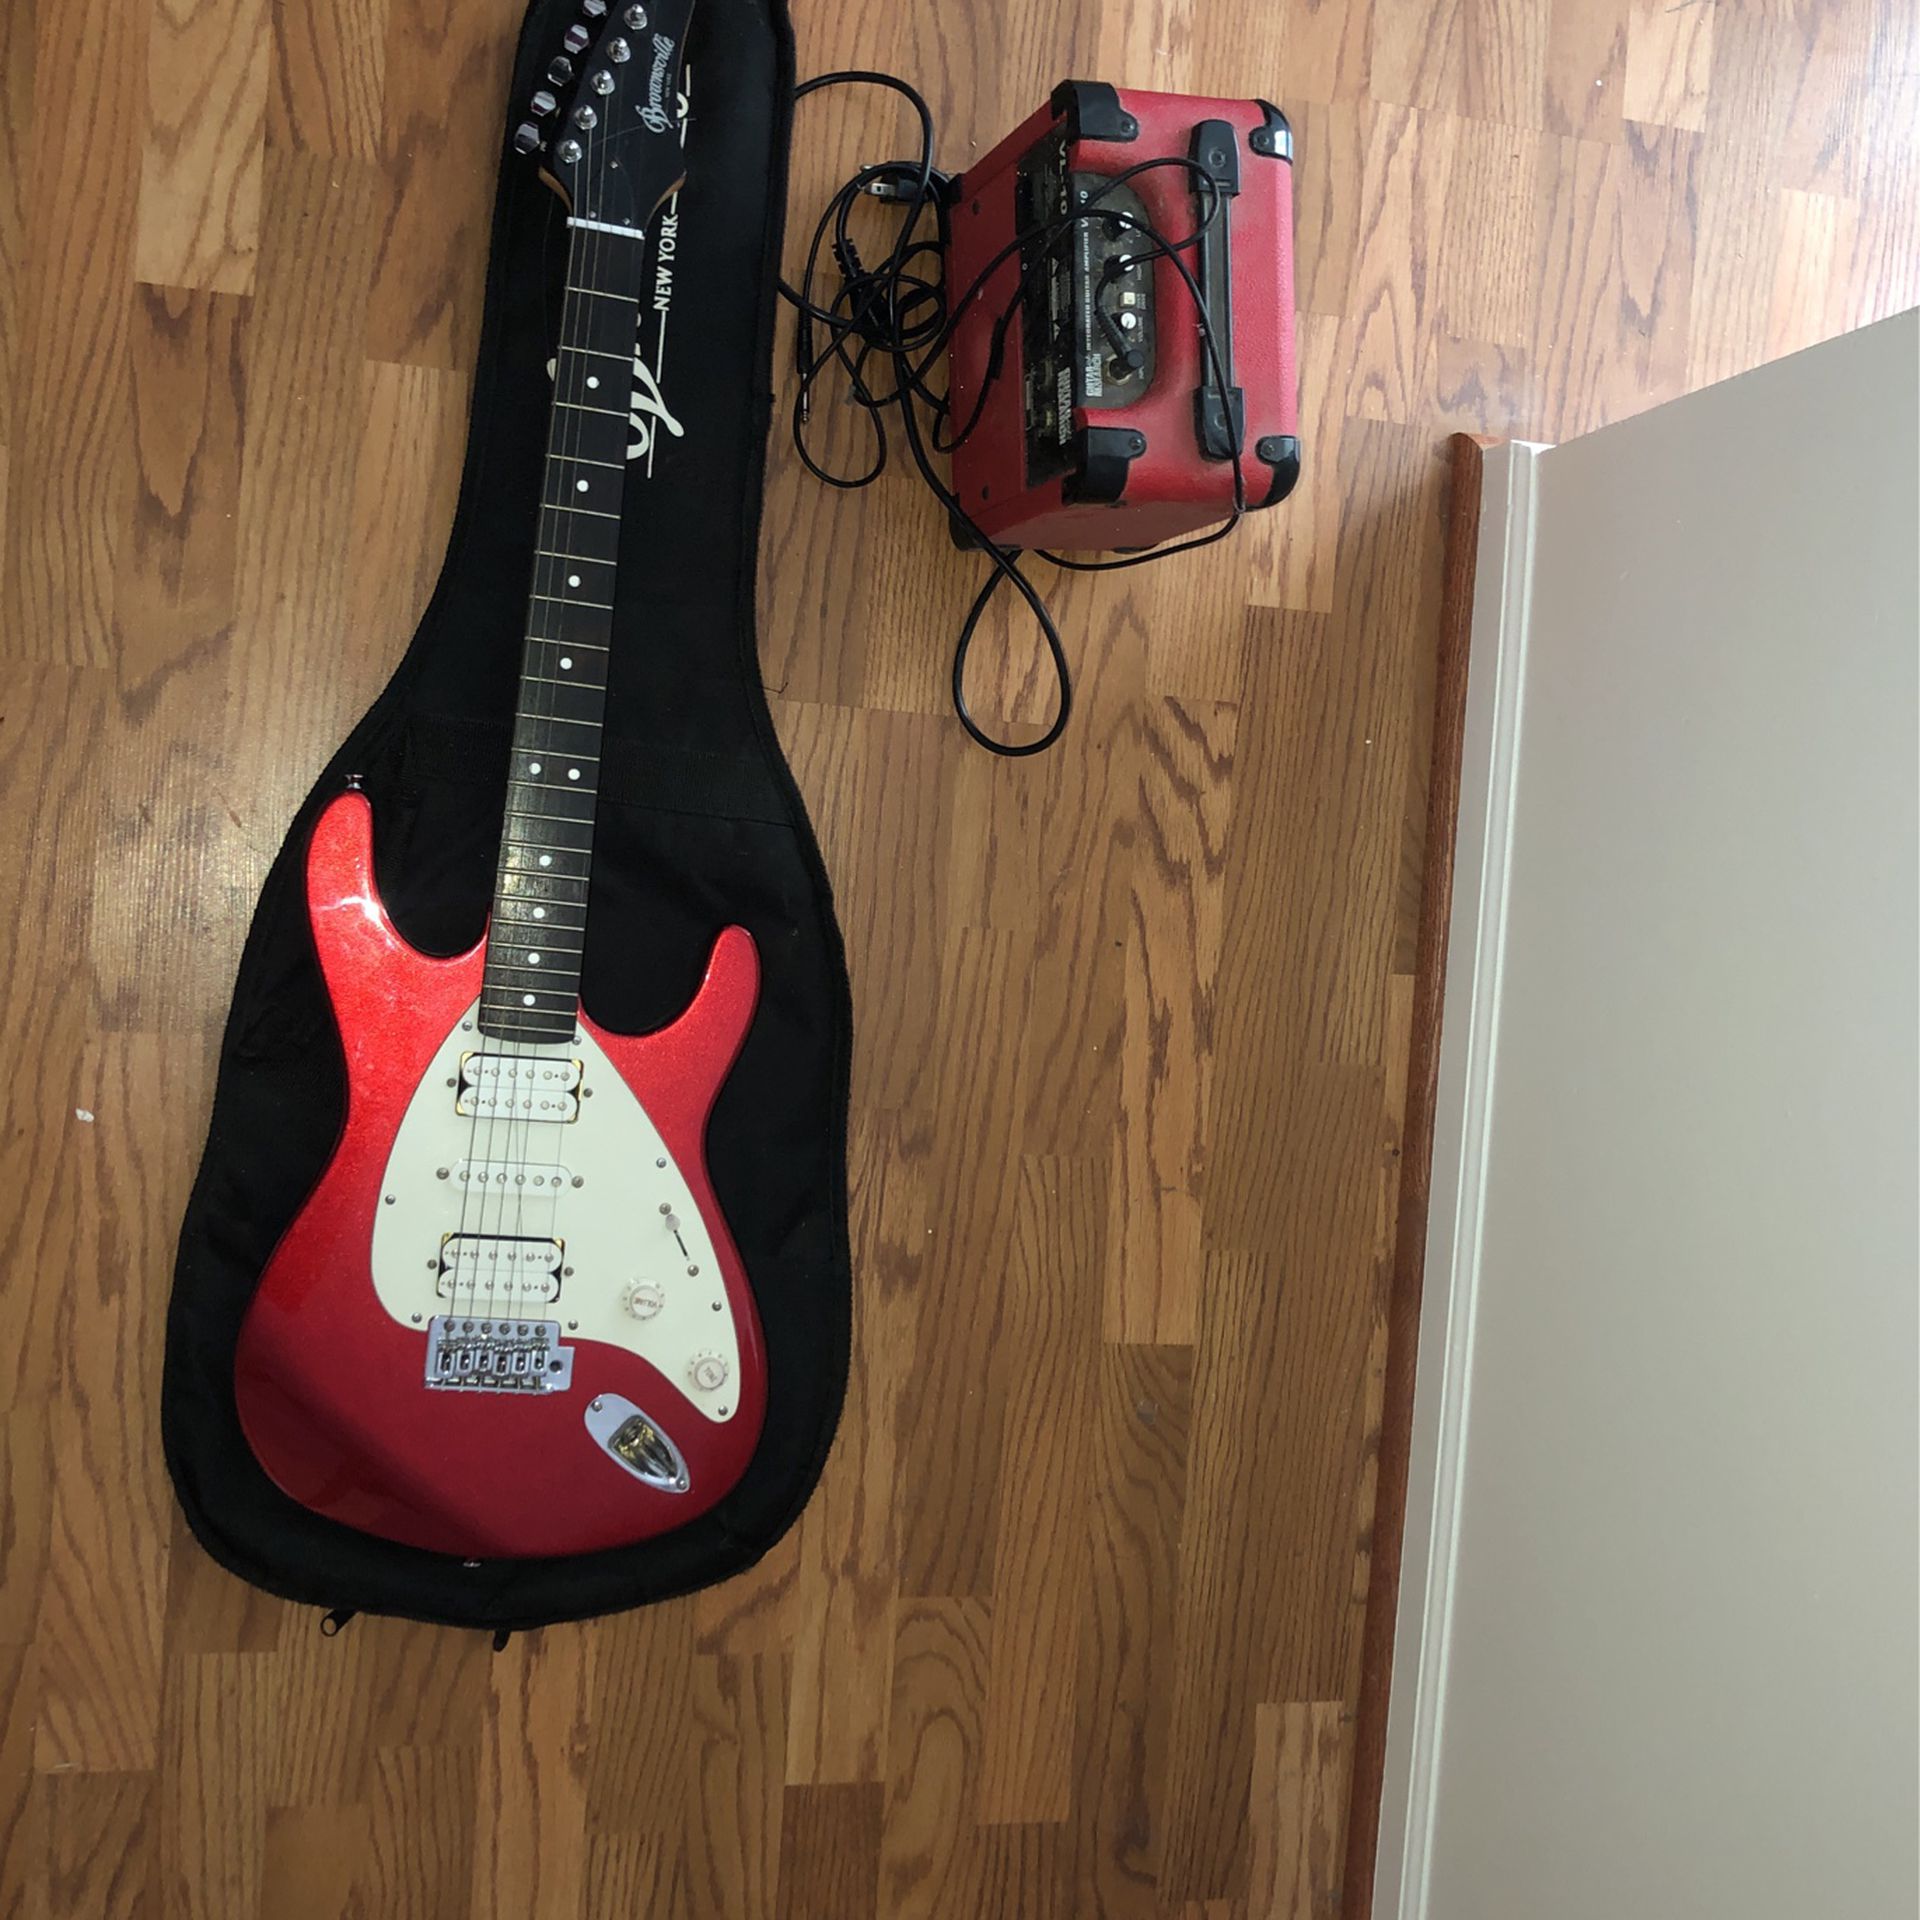 Beginner Electric Guitar And Amp All There Needs A New string